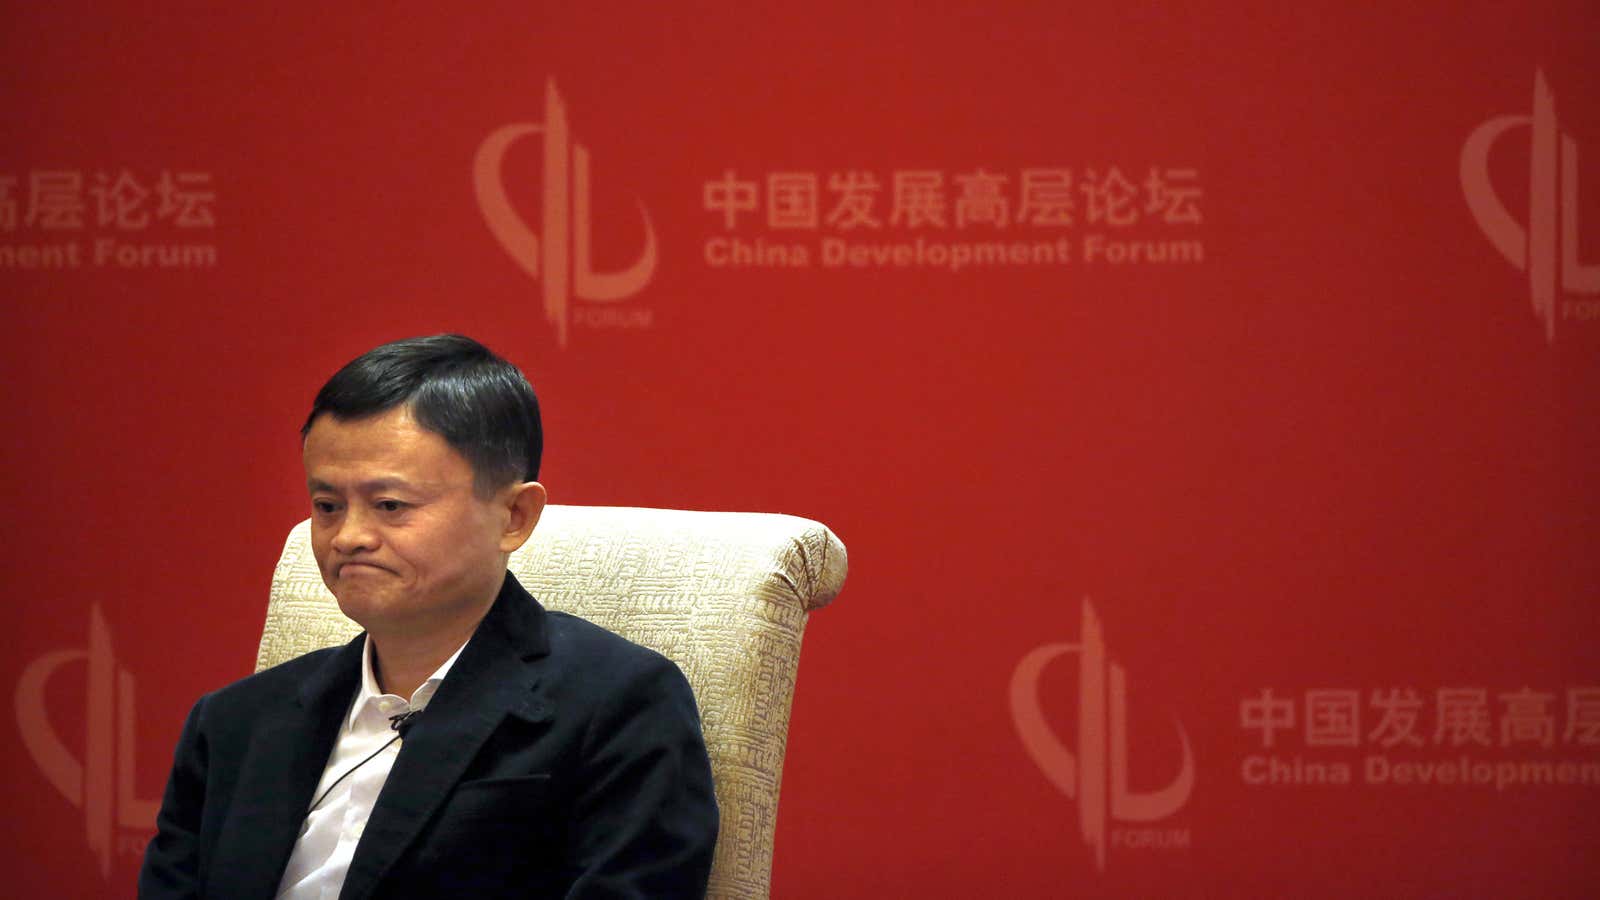 Jack Ma of Alibaba won’t be on Gucci’s invite list anytime soon.